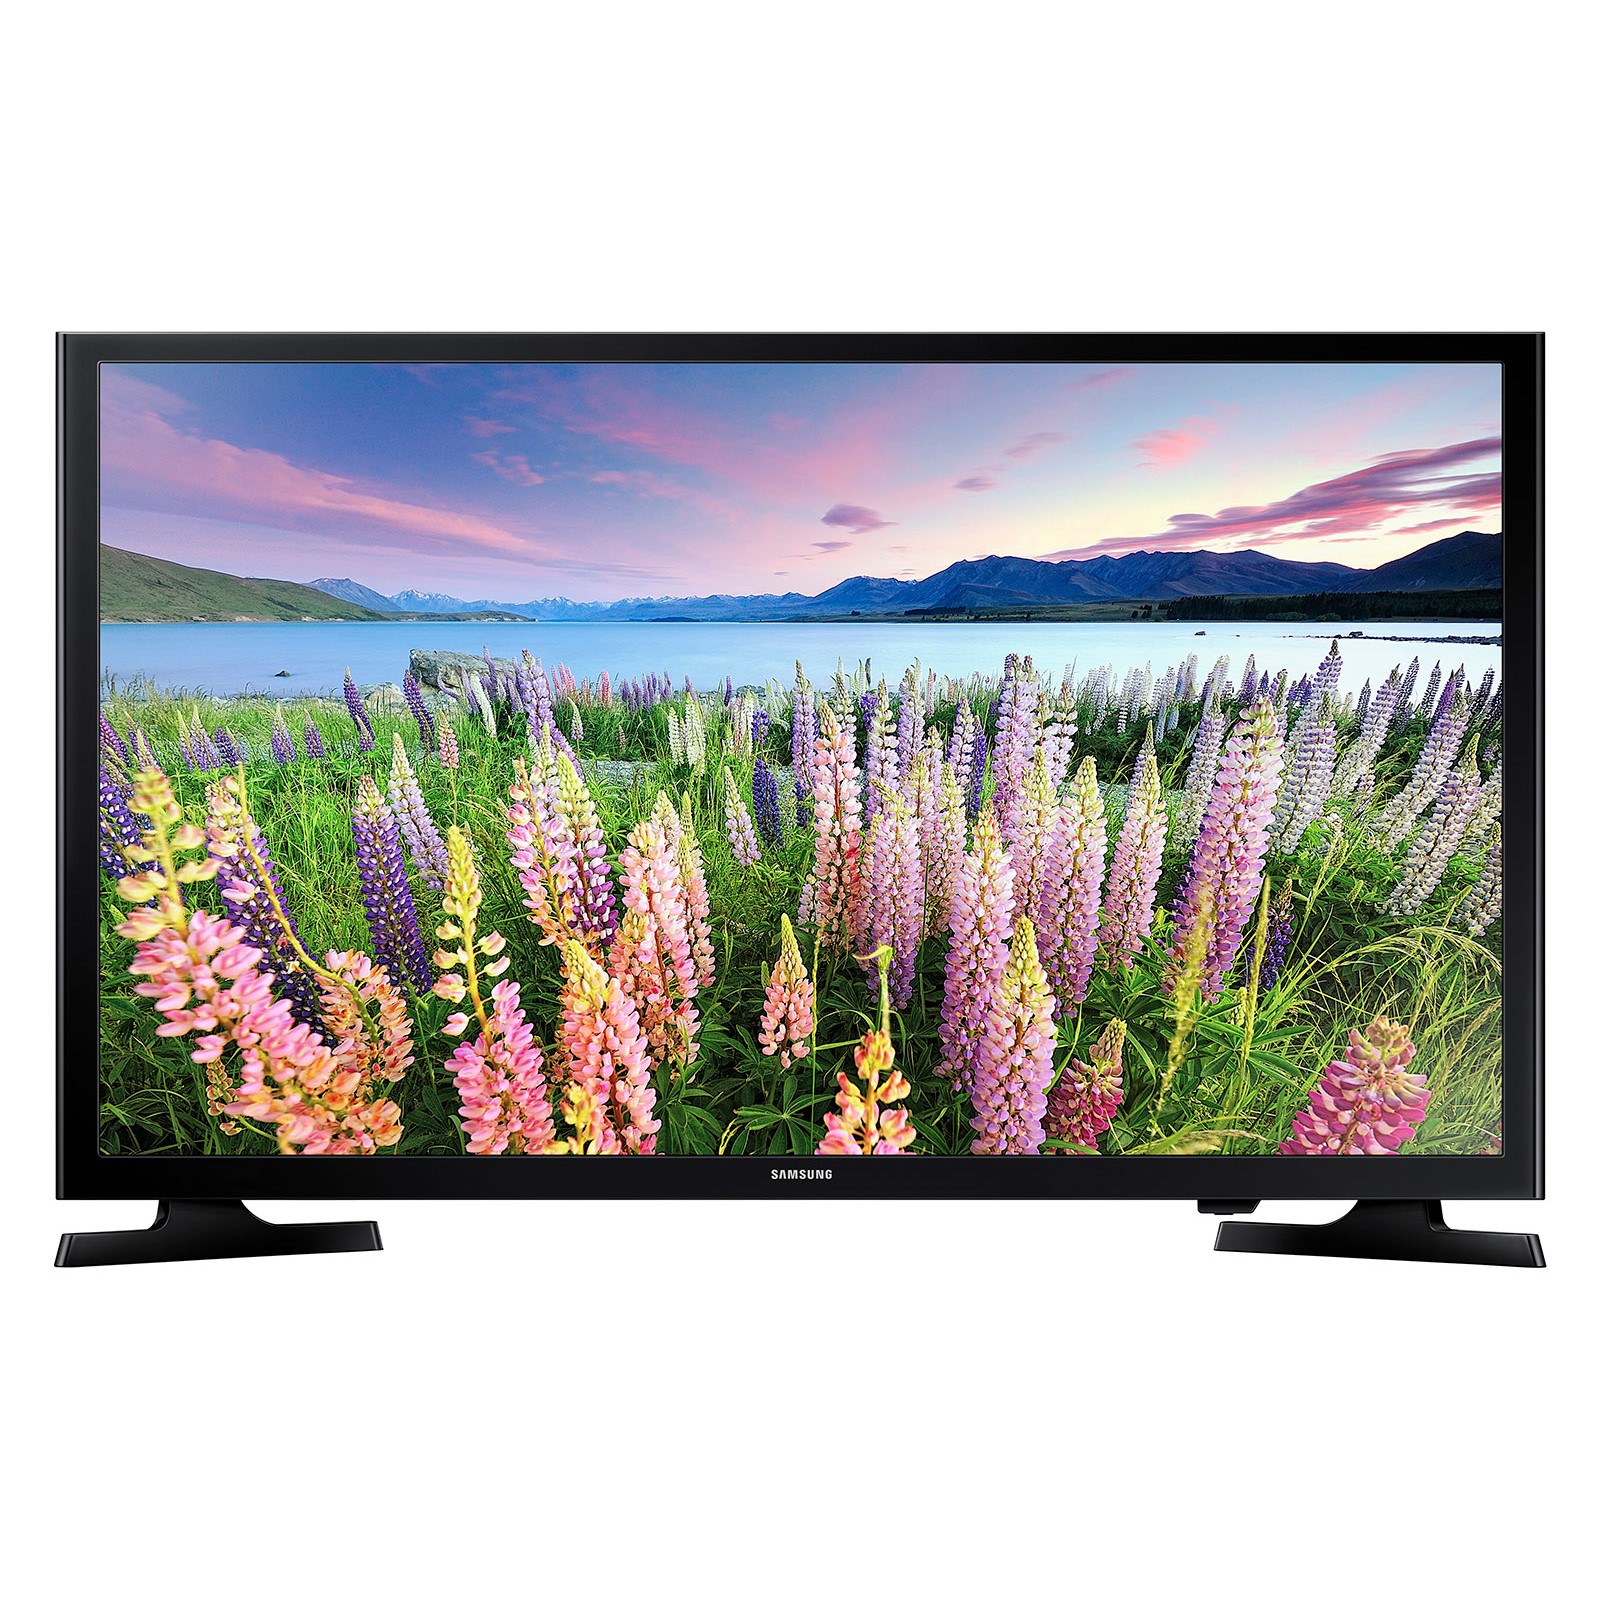 SAMSUNG 40" Class N5200 Series Full HD (1080P) LED Smart Television - UN40N5200AFXZA - image 1 of 5